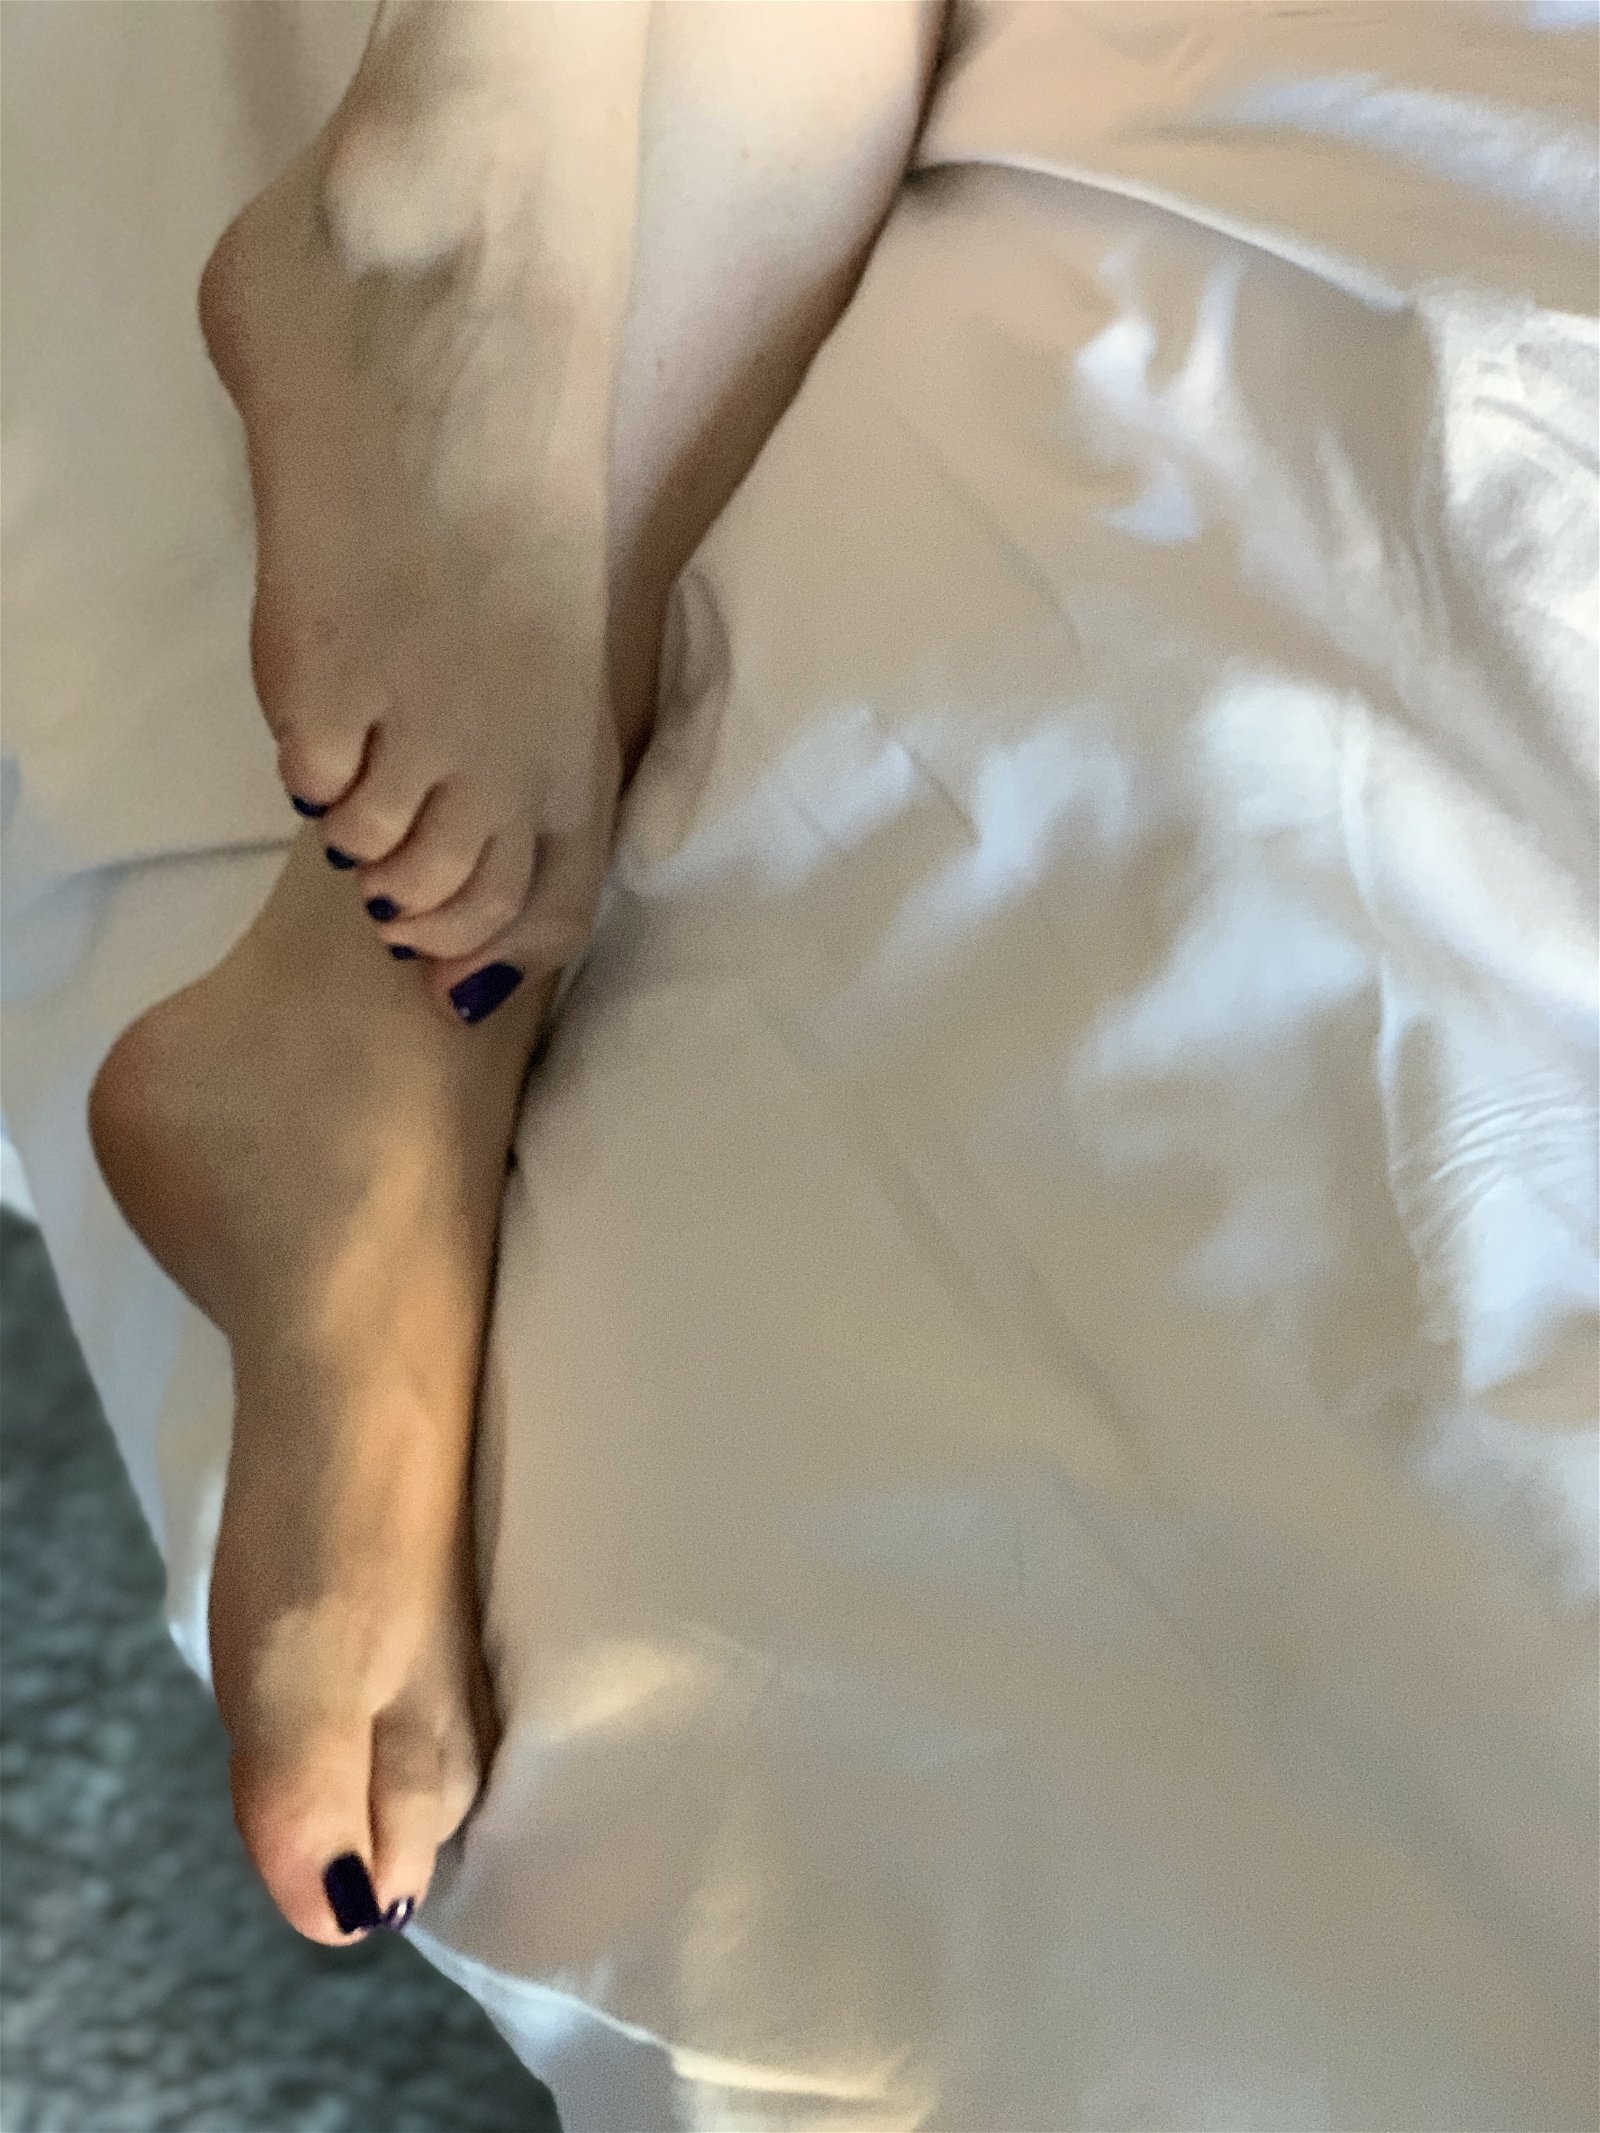 Watch the Photo by jeffbo57 with the username @jeffbo57, posted on December 11, 2019. The post is about the topic High Heel love. and the text says 'barefoot'